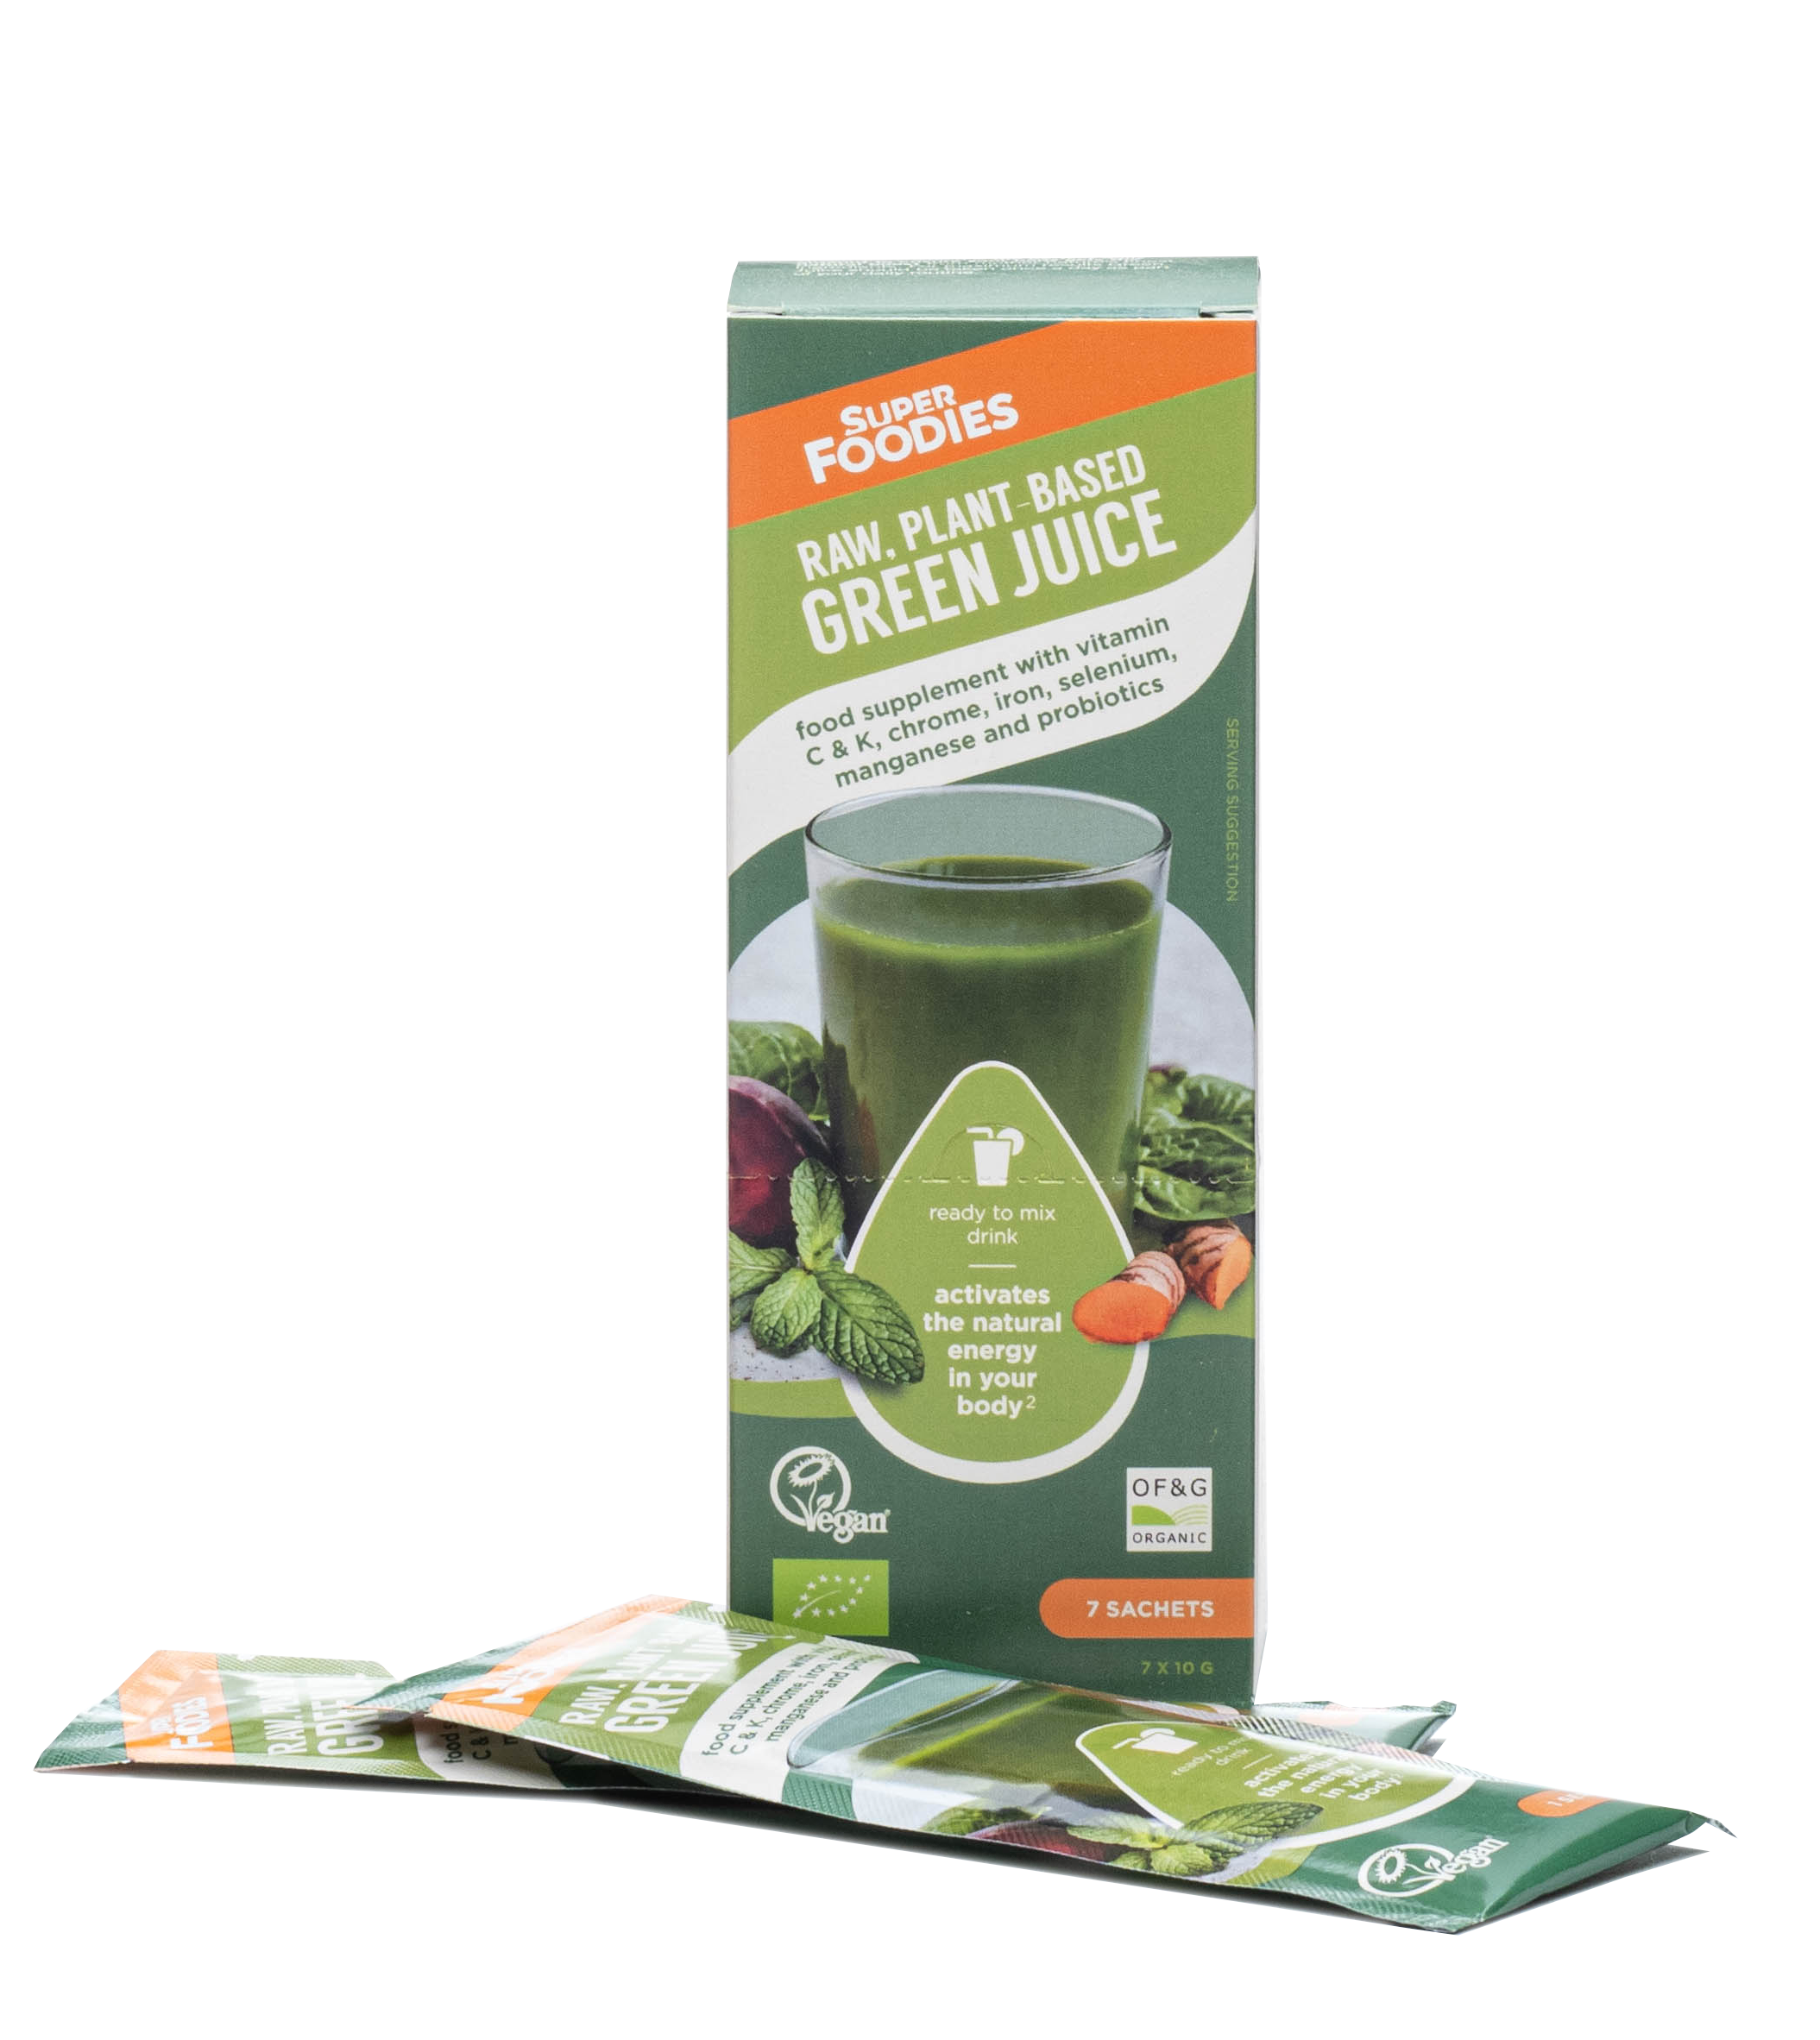 Green-Juice-7-with-sachets